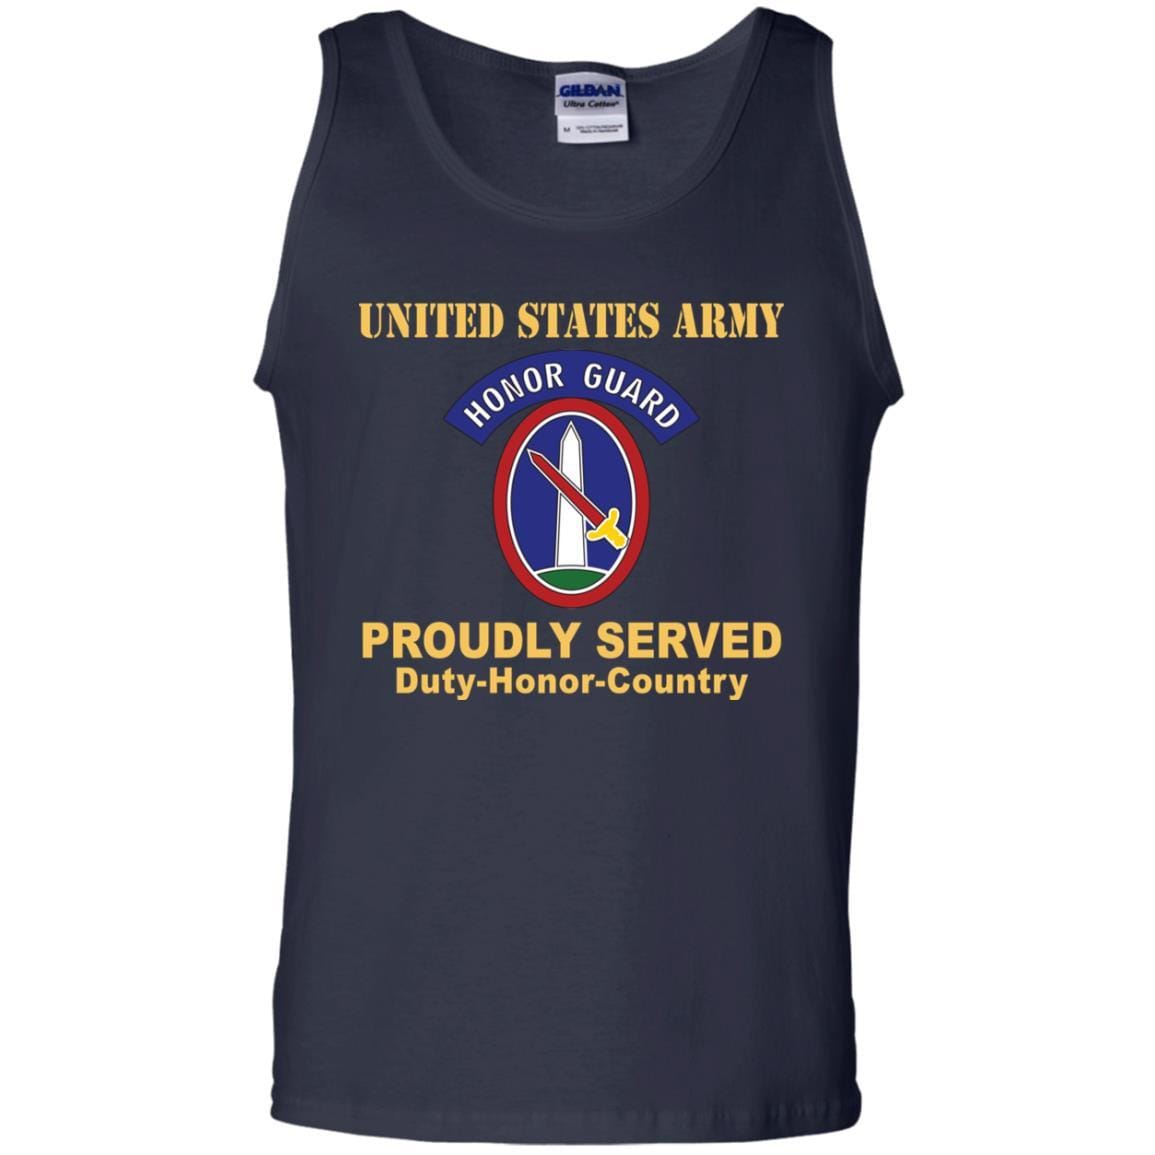 US ARMY 3RD INFANTRY REGIMENT, MILITARY DISTRICT OF WASHINGTON WITH HONOR GUARD TAB- Proudly Served T-Shirt On Front For Men-TShirt-Army-Veterans Nation